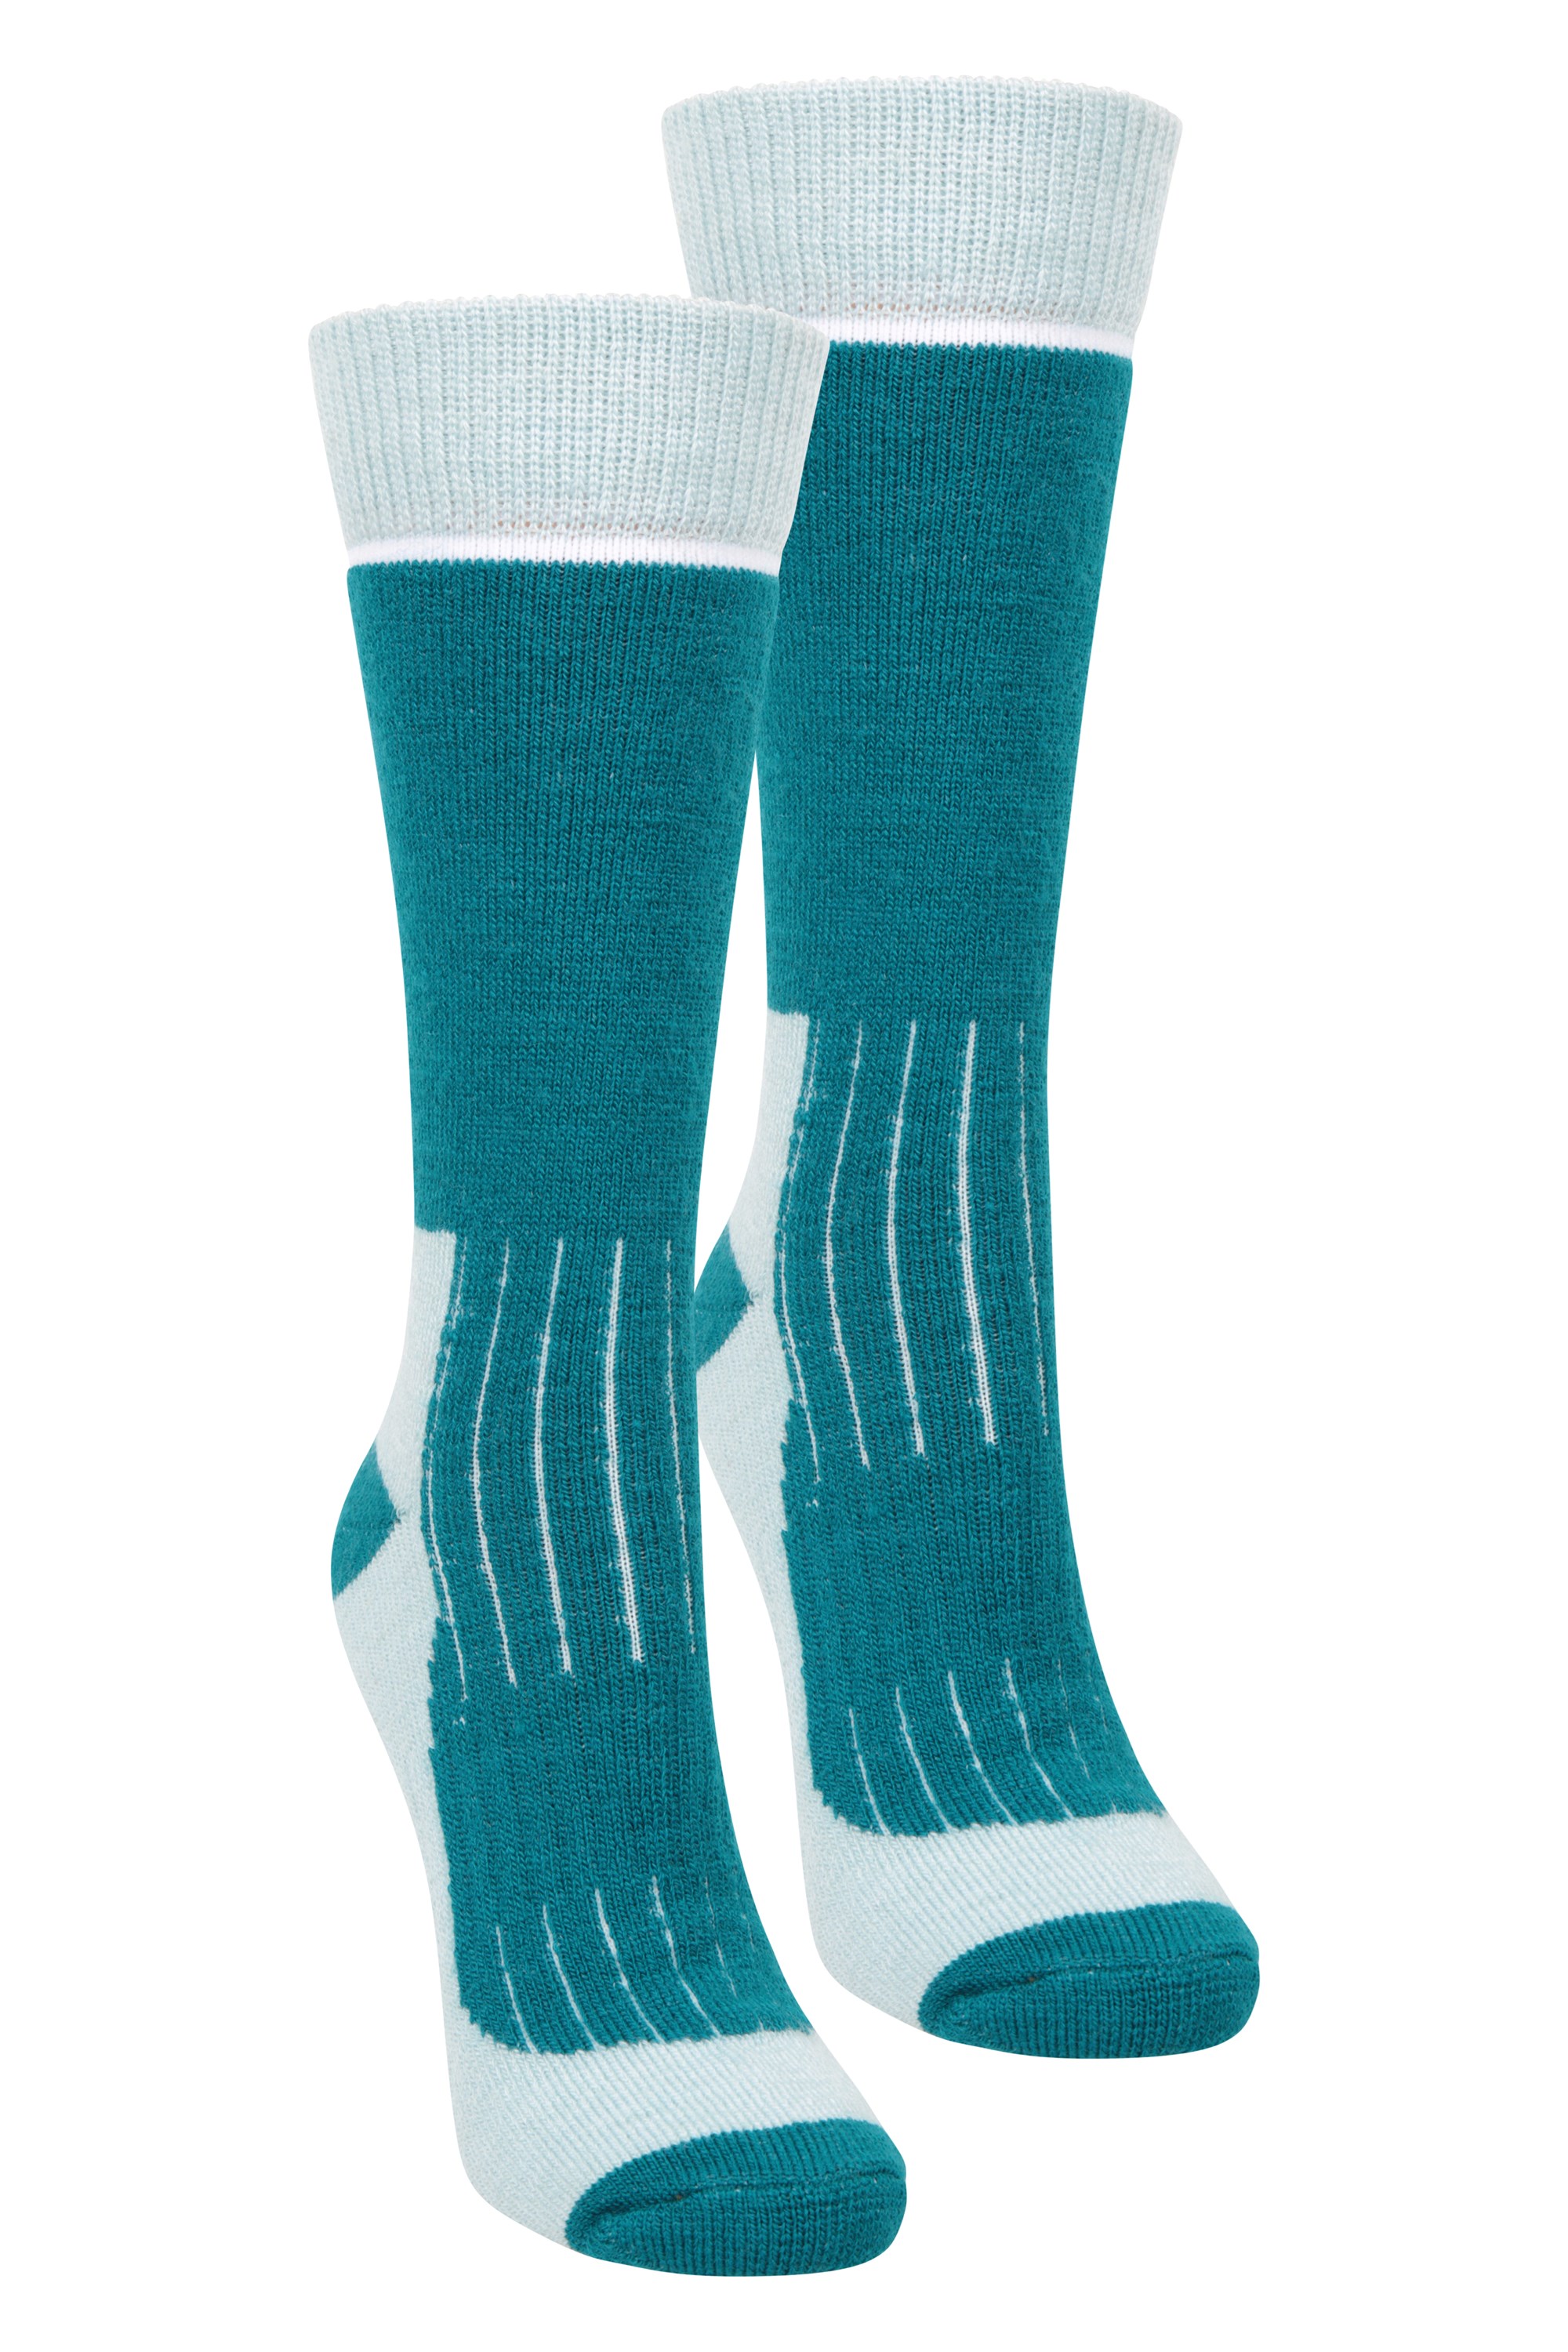 Mountain Warehouse Mountain Warehouse Womens Outdoor Sock 3 Pack Ladies Stretchy Cuff Sports Socks 